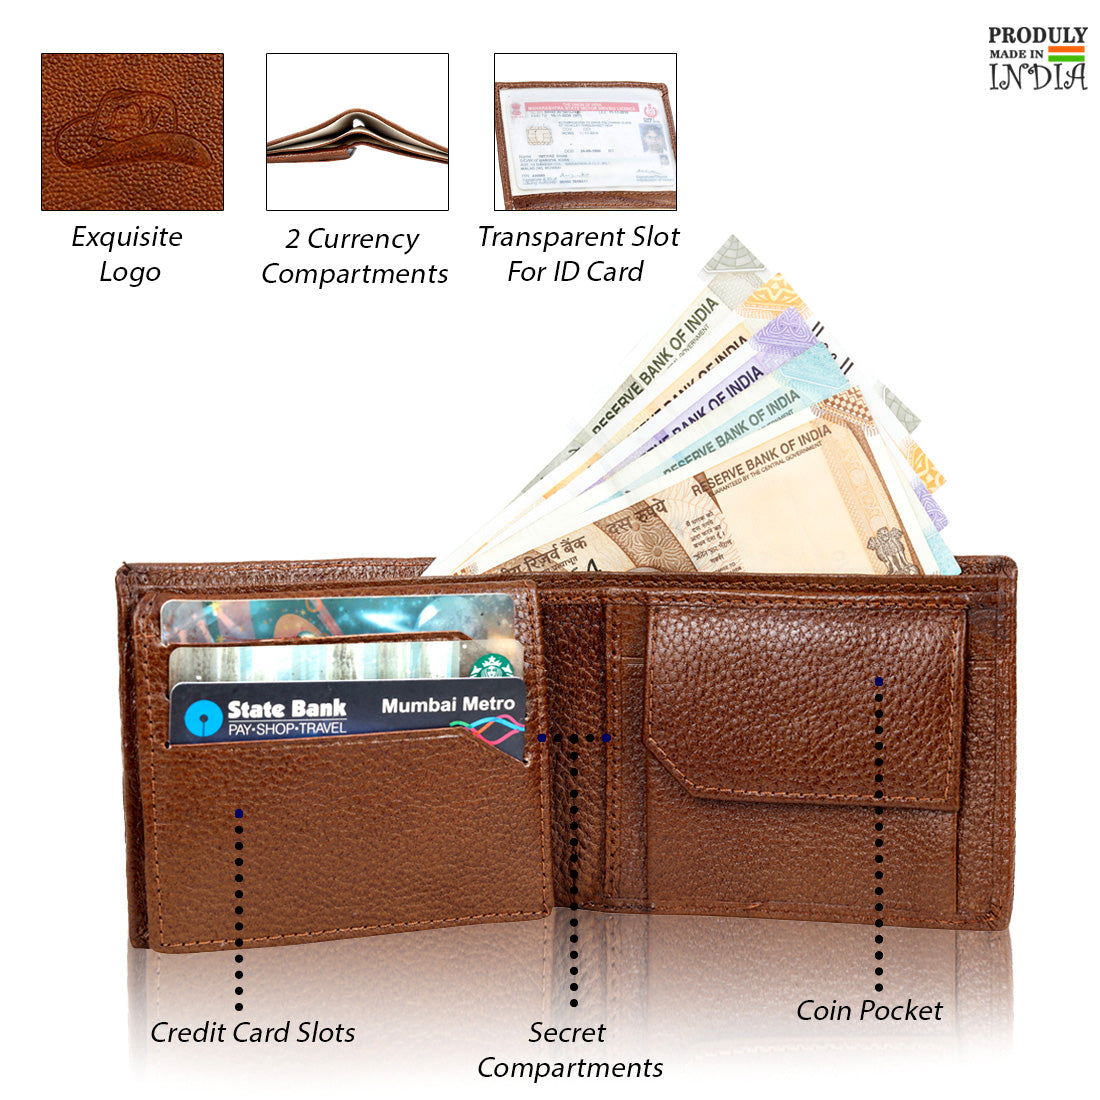 Leather World Genuine Grained Leather Wallet For Men